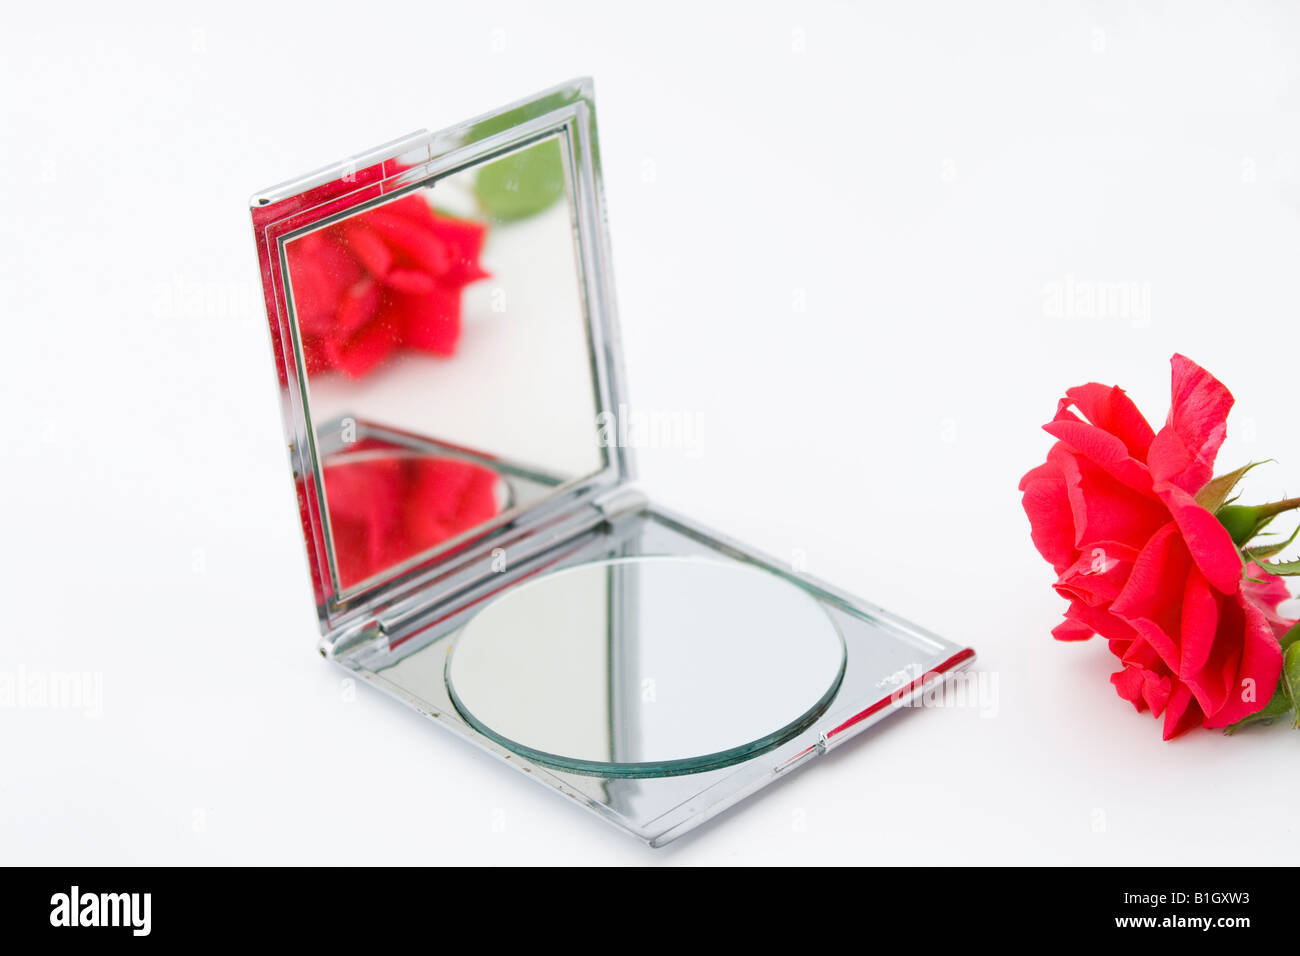 Red rose with reflection in small mirror Stock Photo